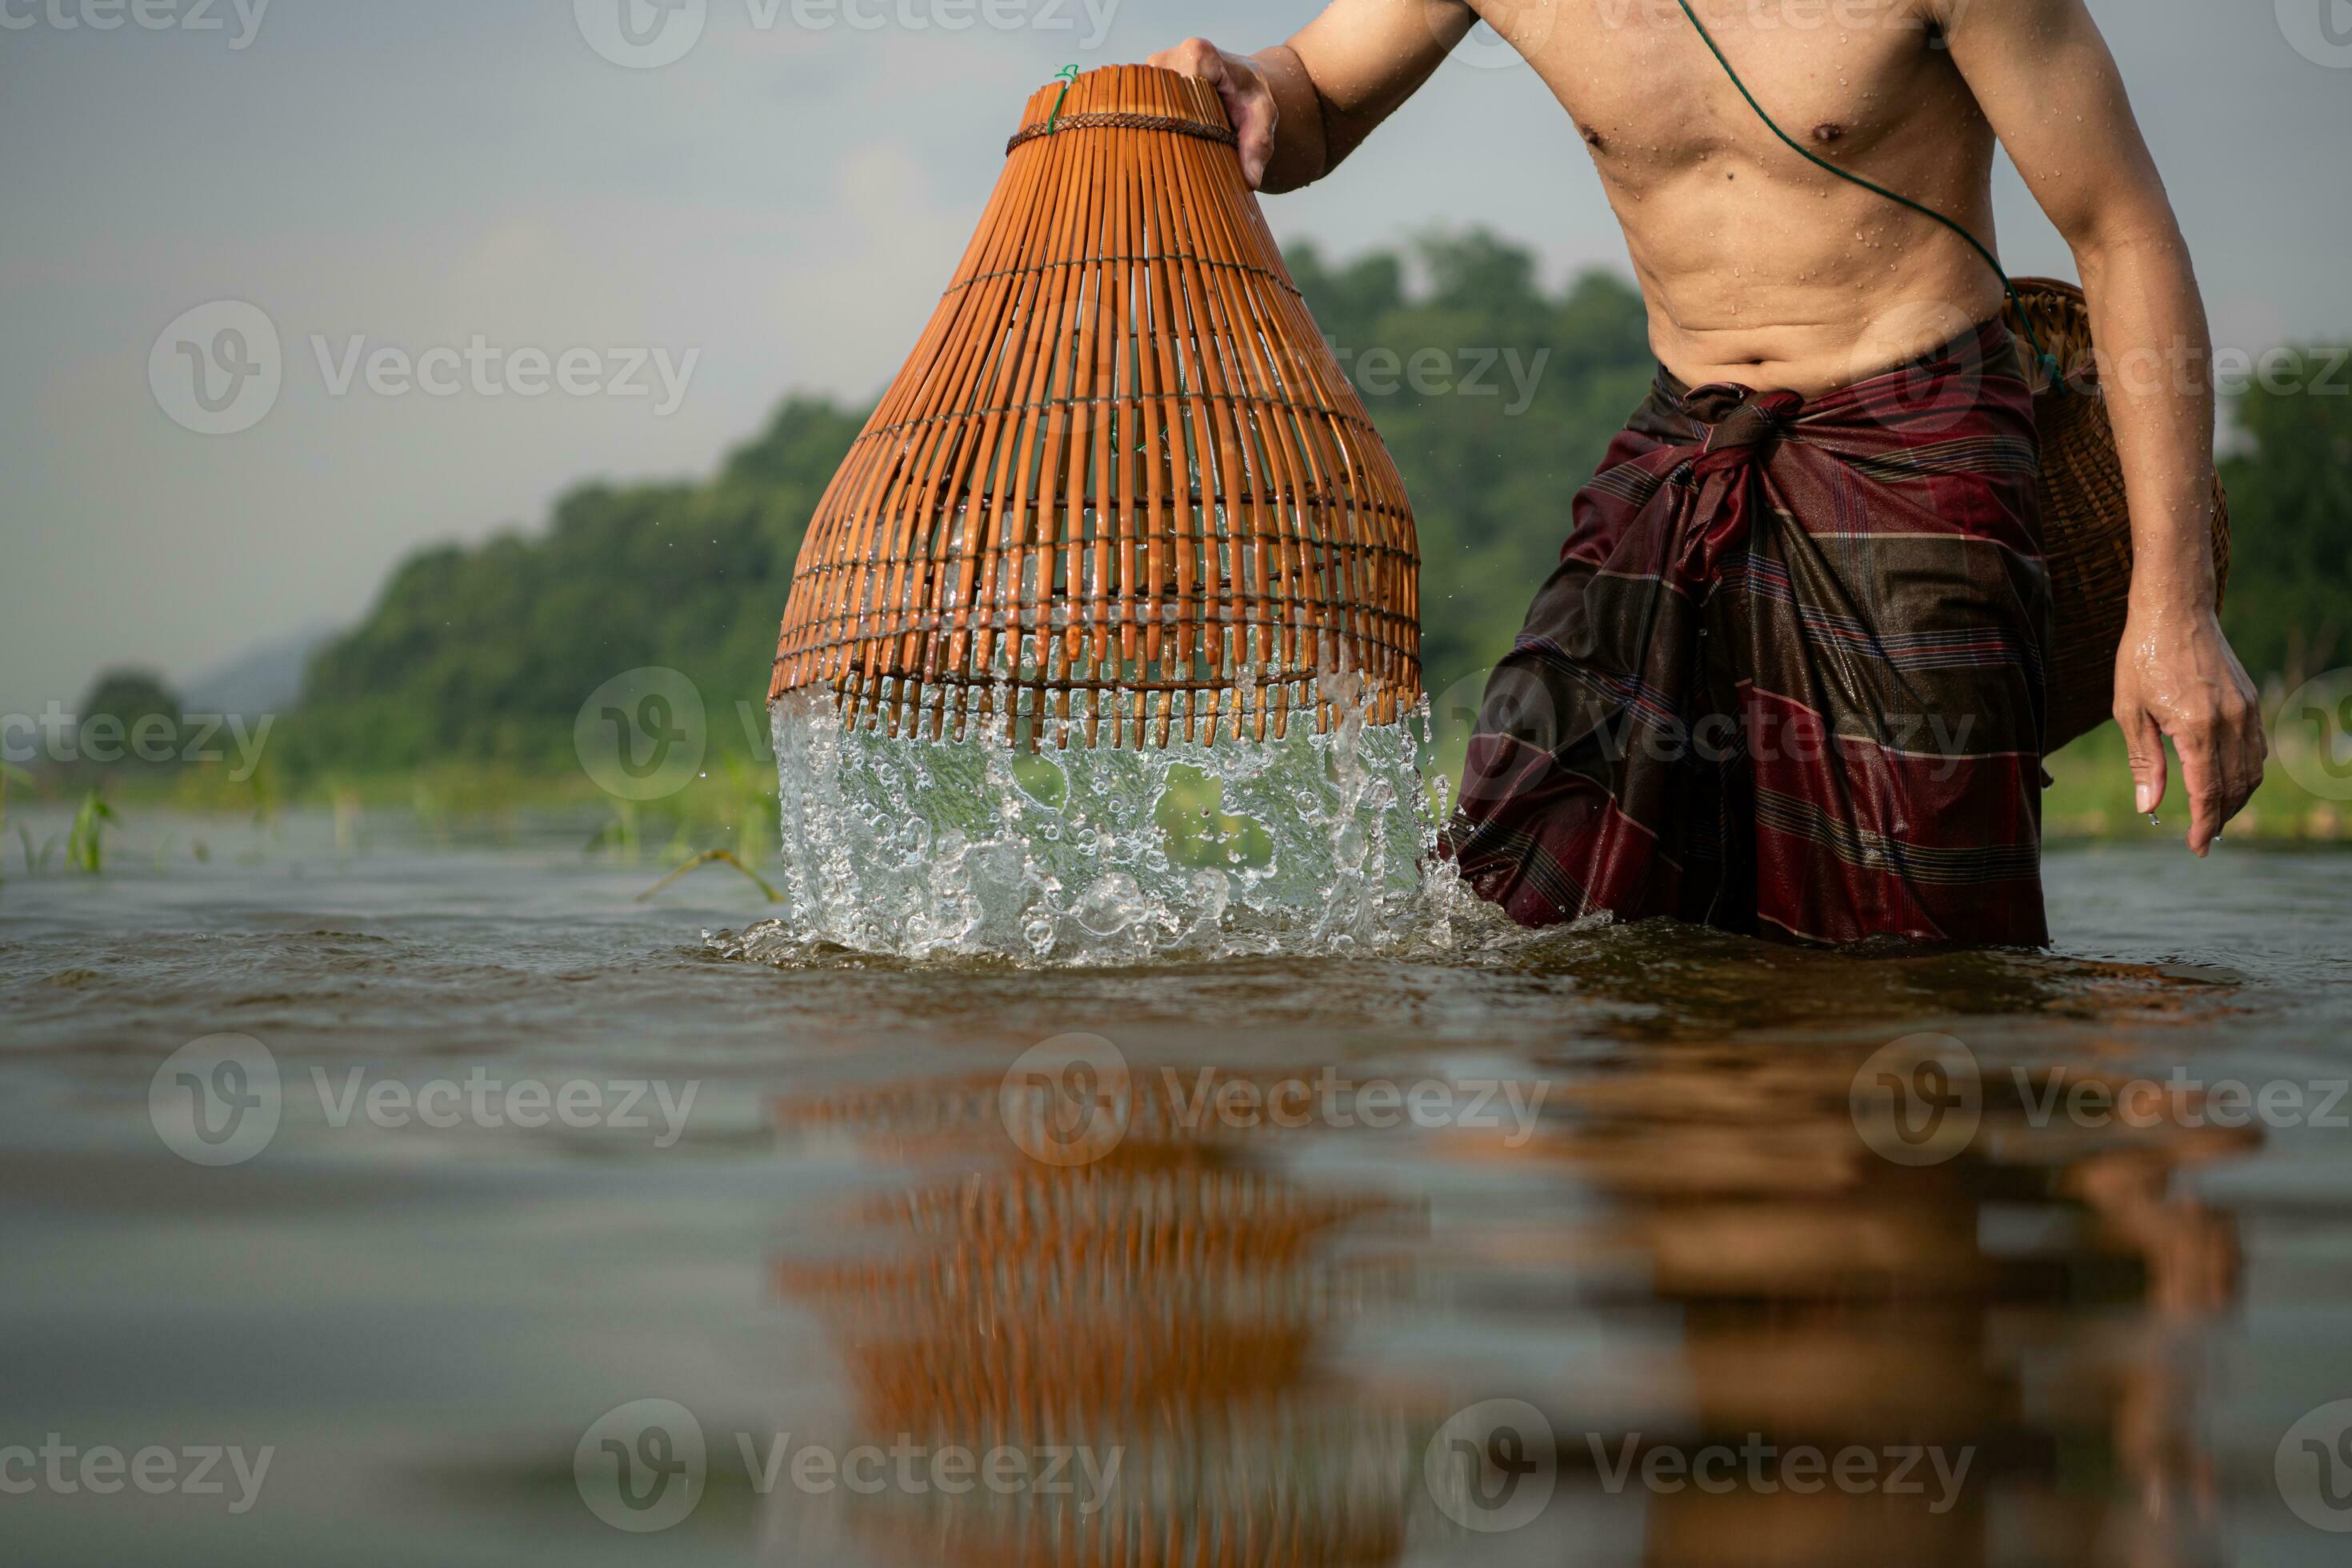 Fisherman using traditional fishing gear to catch fish for cooking